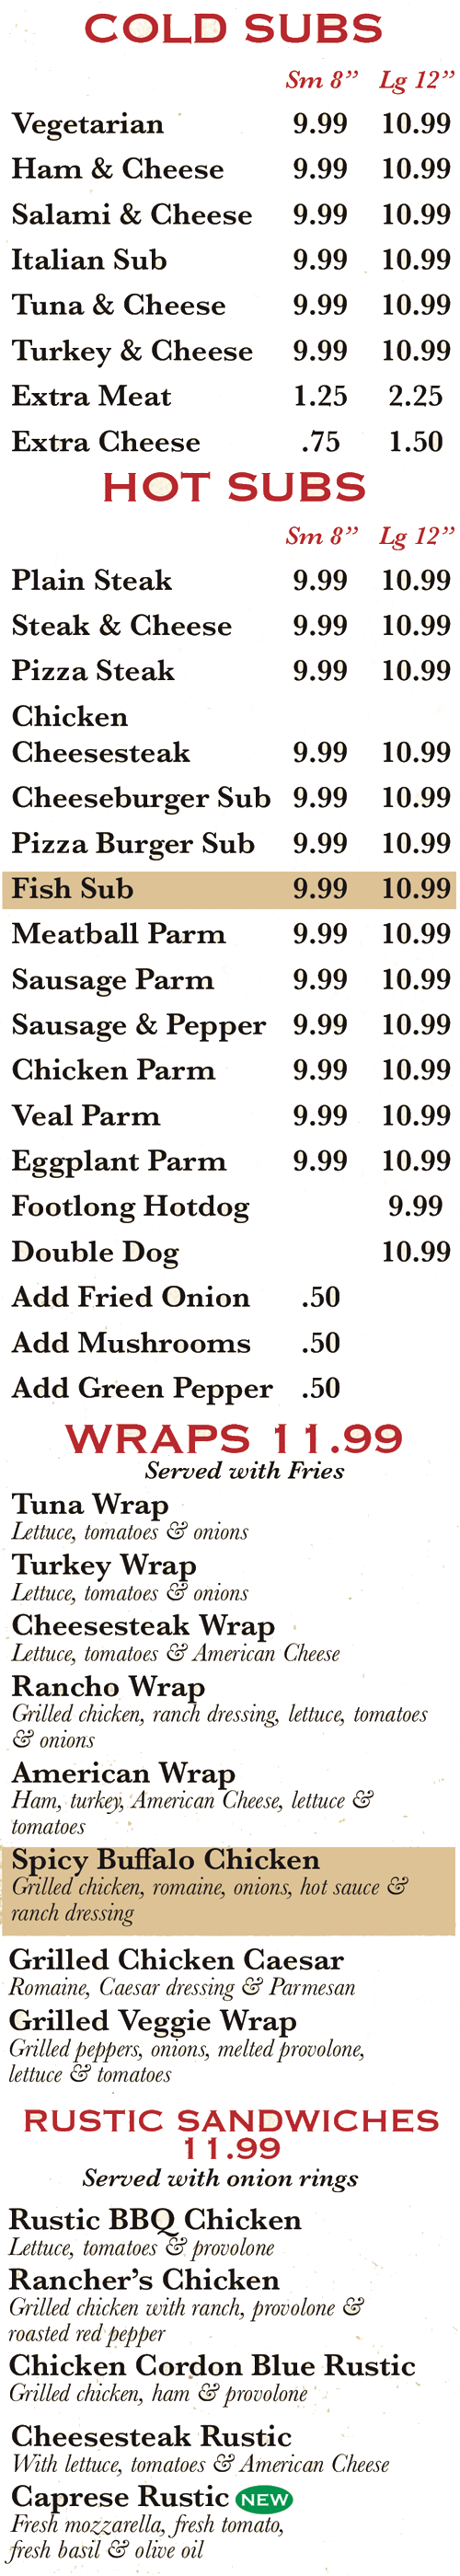 Subs, Wraps, and Sandwiches Menu